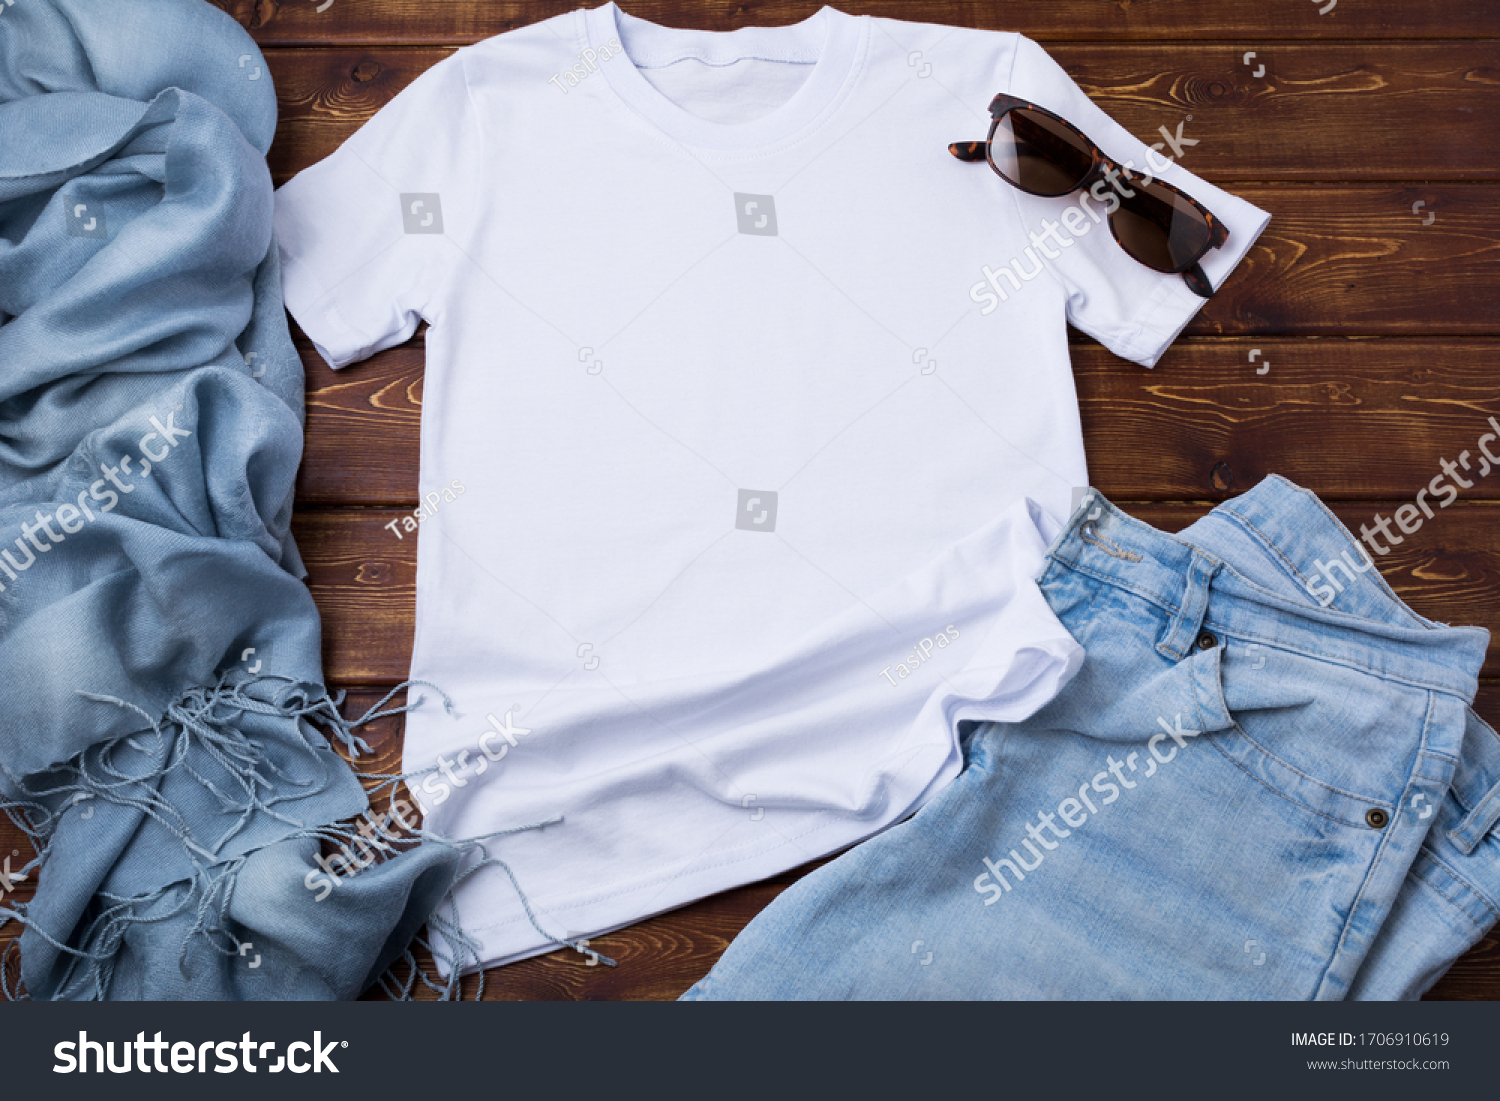 White women’s cotton T-shirt mockup with blue jeans, sunglasses and turquoise scarf. Design t shirt template, tee print presentation mock up #1706910619